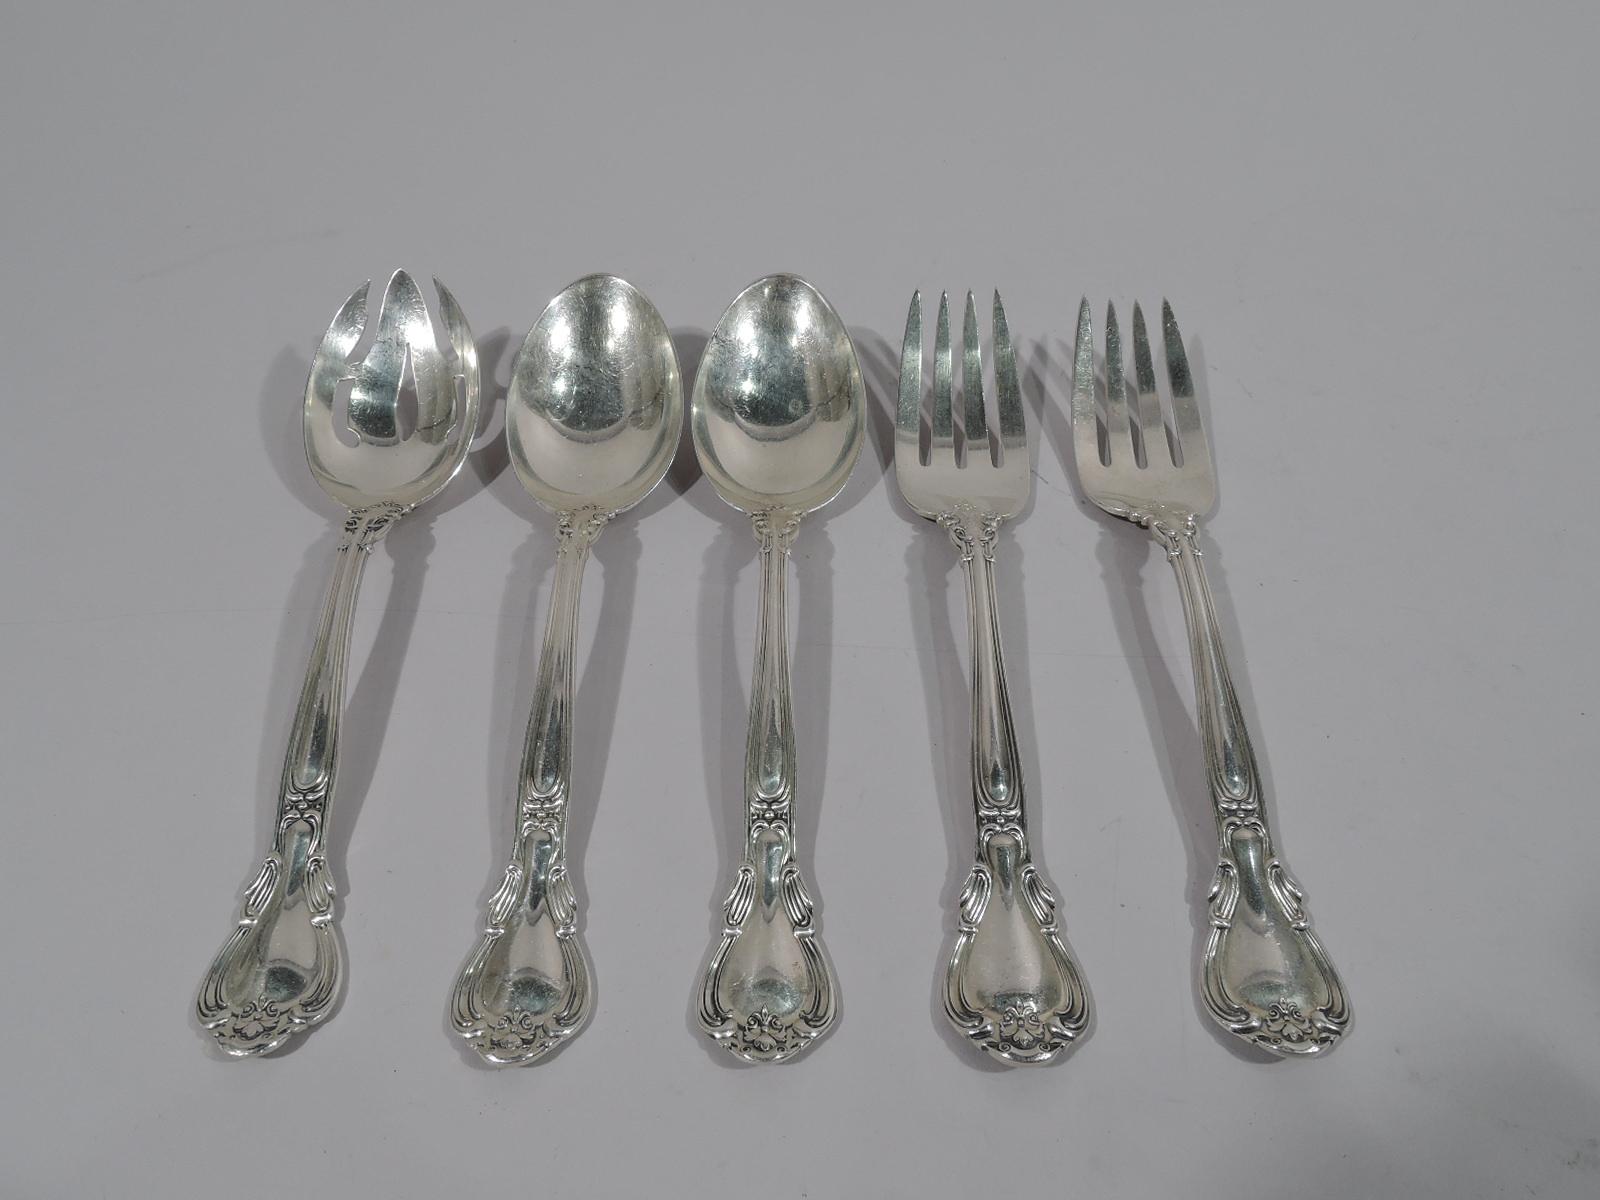 Rococo Revival Gorham Chantilly Sterling Silver Set with 96 Pieces